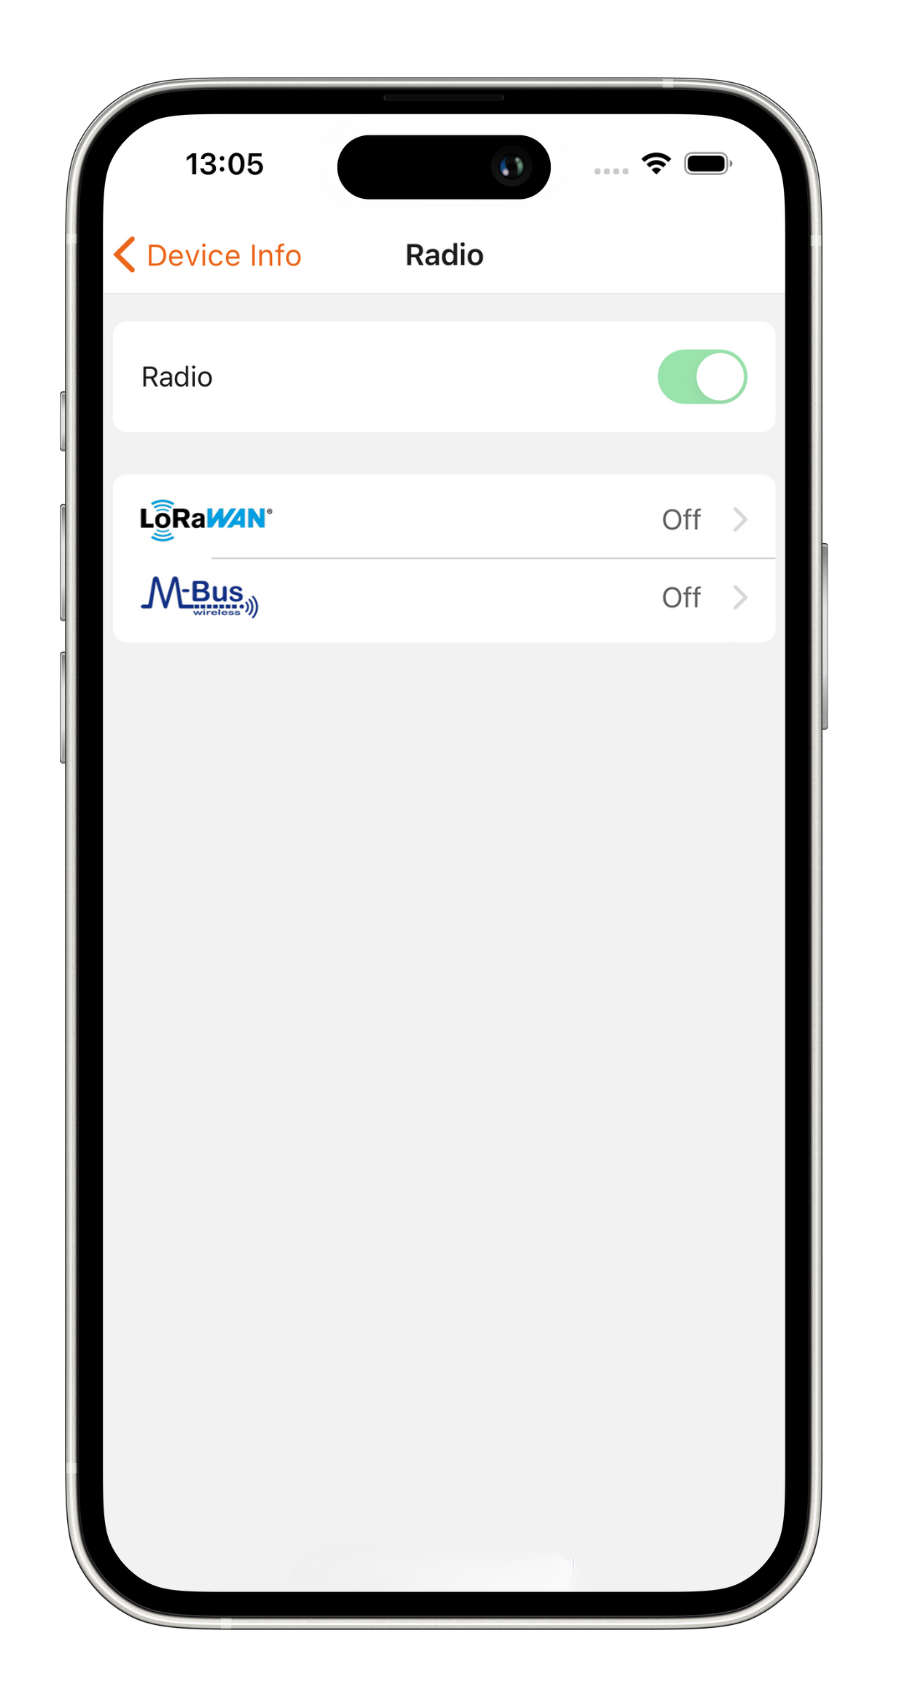 Axilink mobile app by Mainlink with network